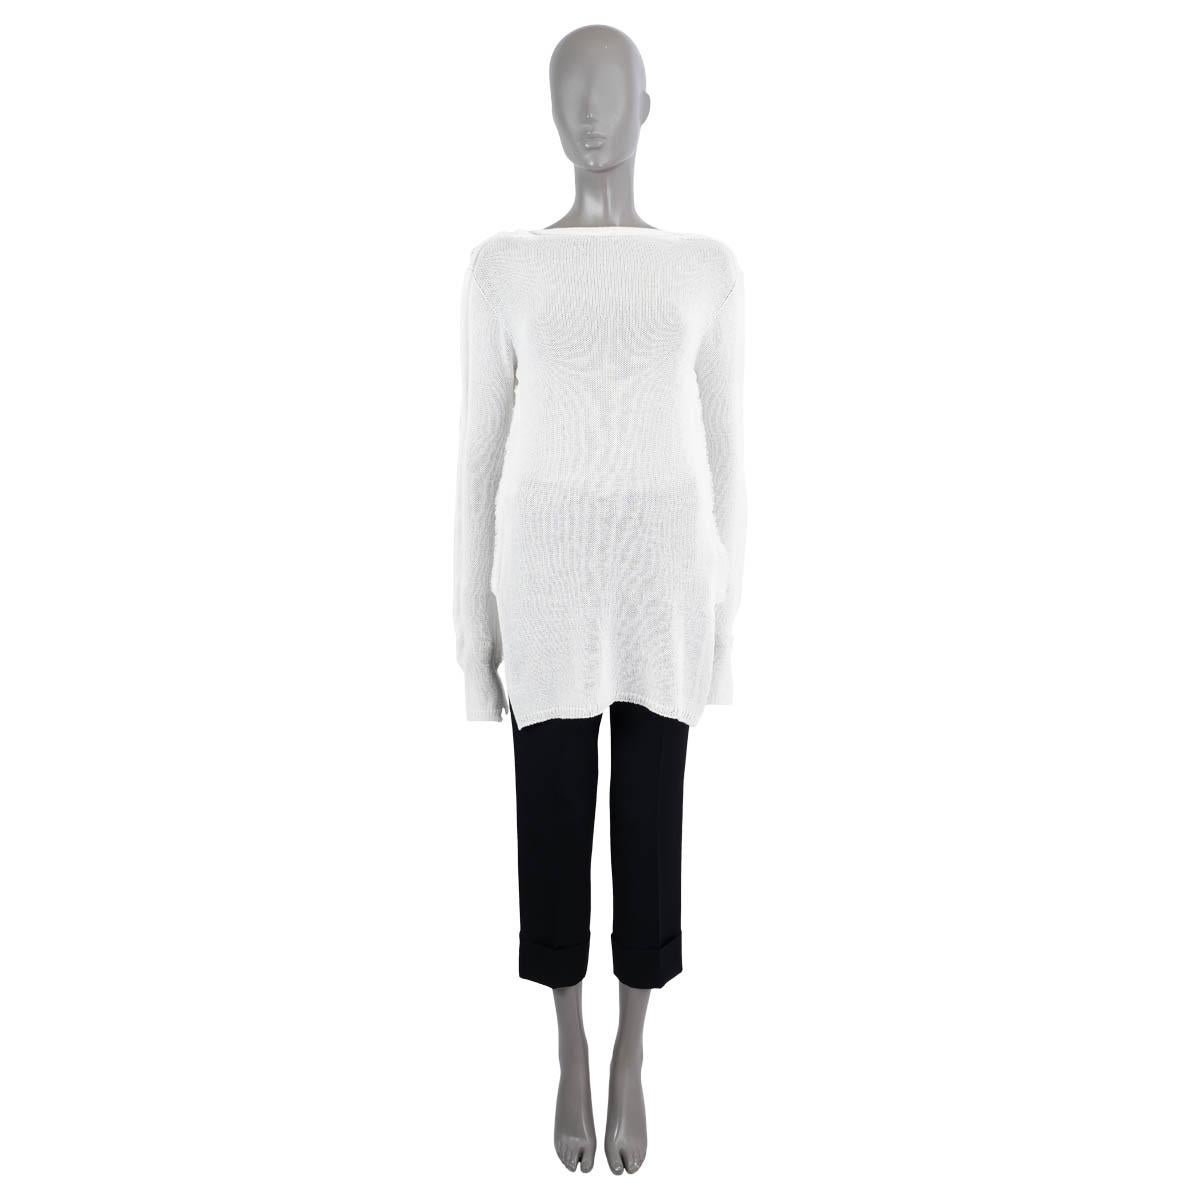 100% authentic Marni longline sheer knit sweater in white cotton (100%). The design features extra long sleeves, a boat-neck, ripped hem details and slits on bottom hem and sleeves. Brand new with tags.

2021 Spring/Summer

Measurements
Tag